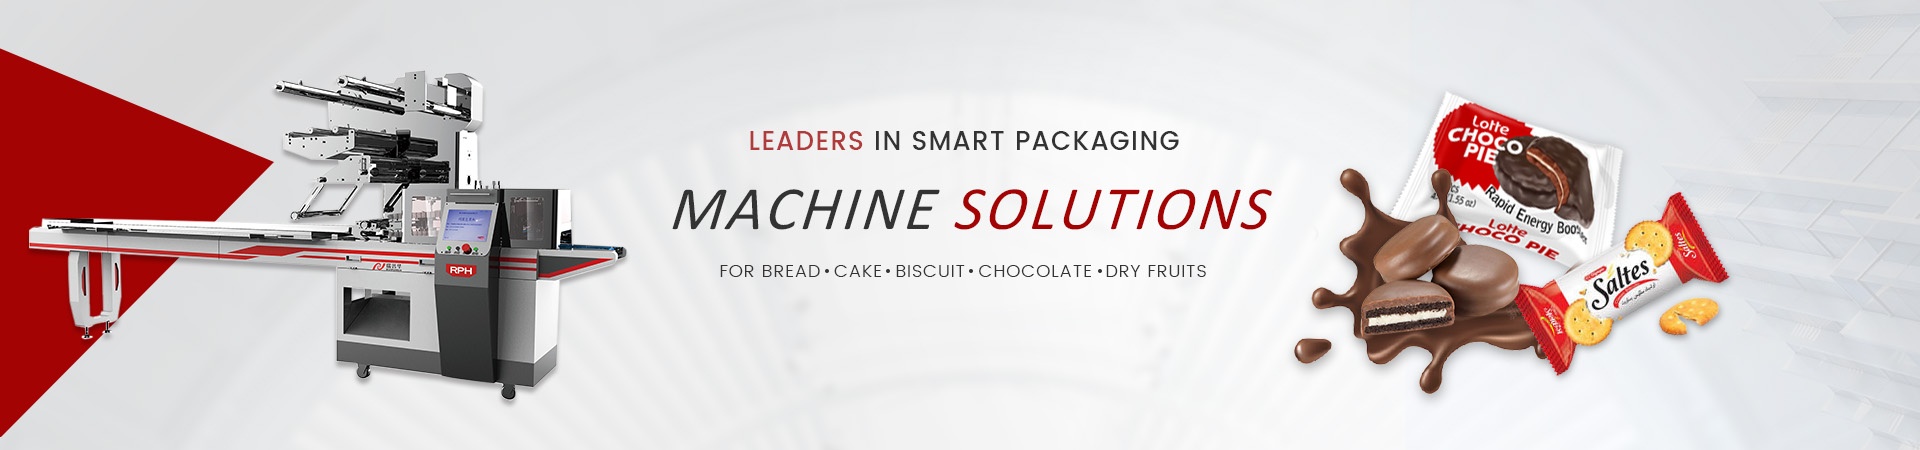 Maximizing Efficiency With Food Packaging Machine Technology